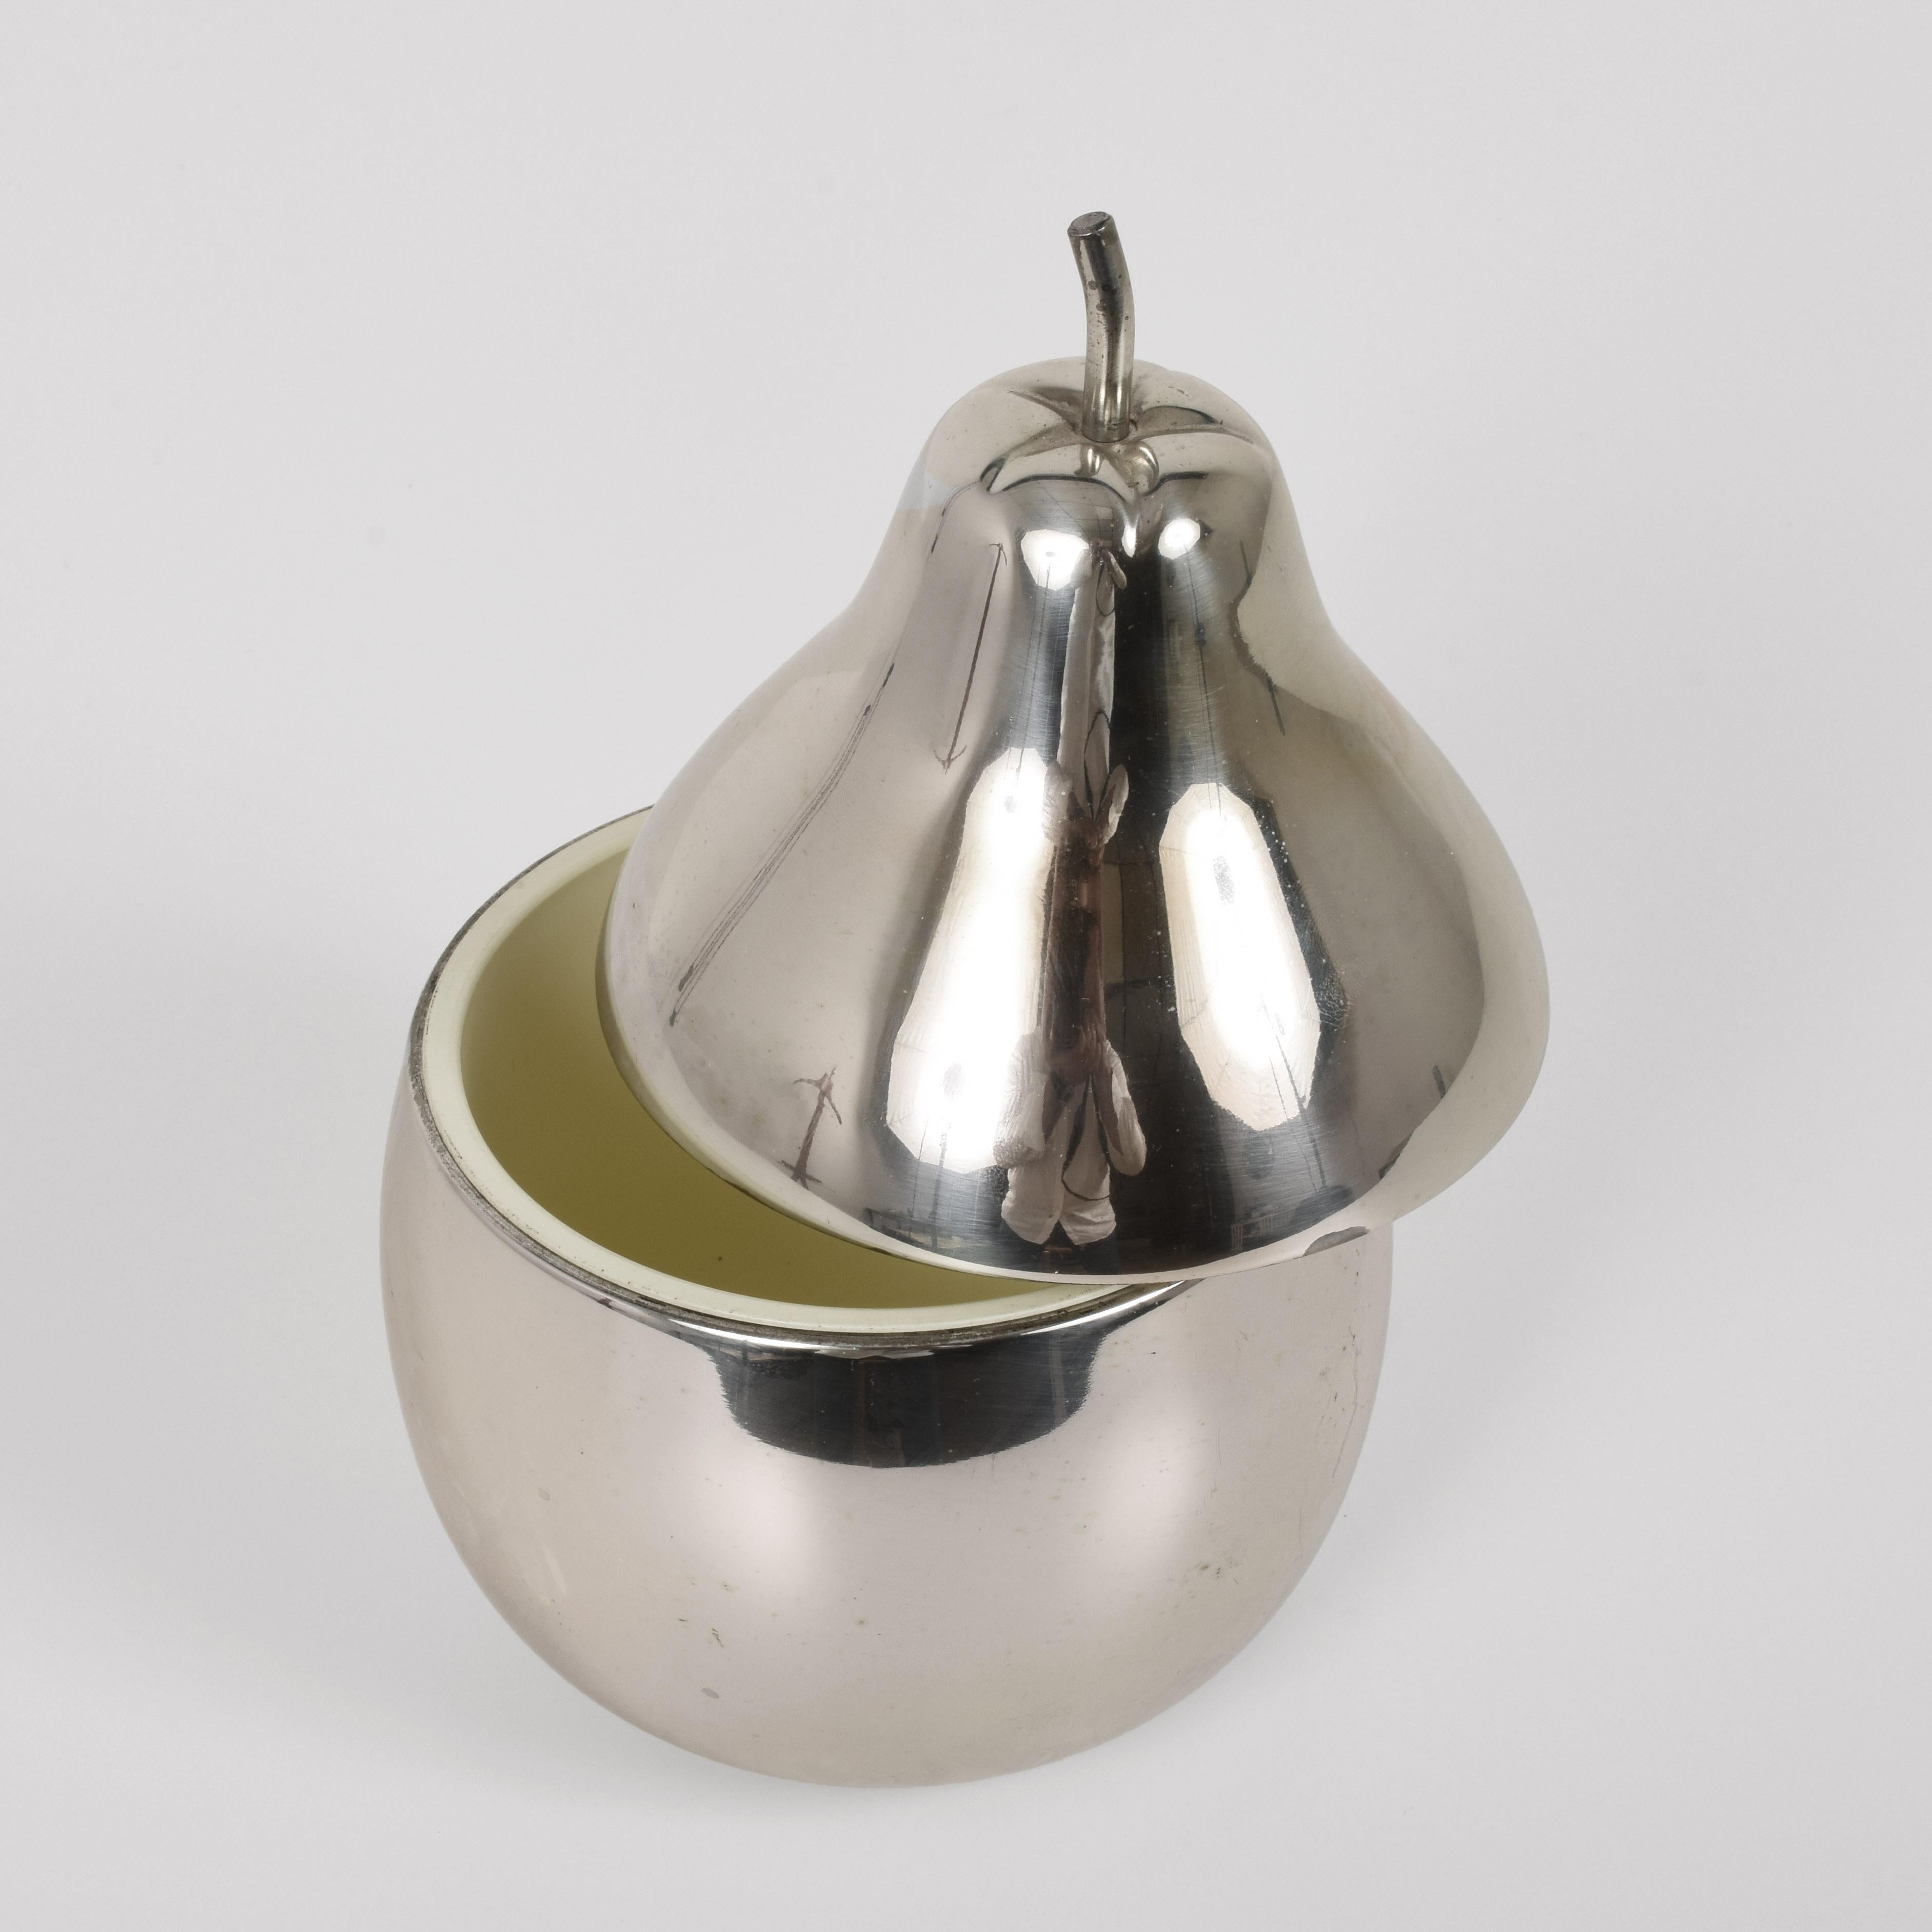 A wonderful midcentury chromed silver plate pear-shaped Italian central ice bucket. This item was produced in Italy during the 1970s.

It has the shape of a pear and two pieces, the upper part can be removed by pulling the stalk.

A wonderful,